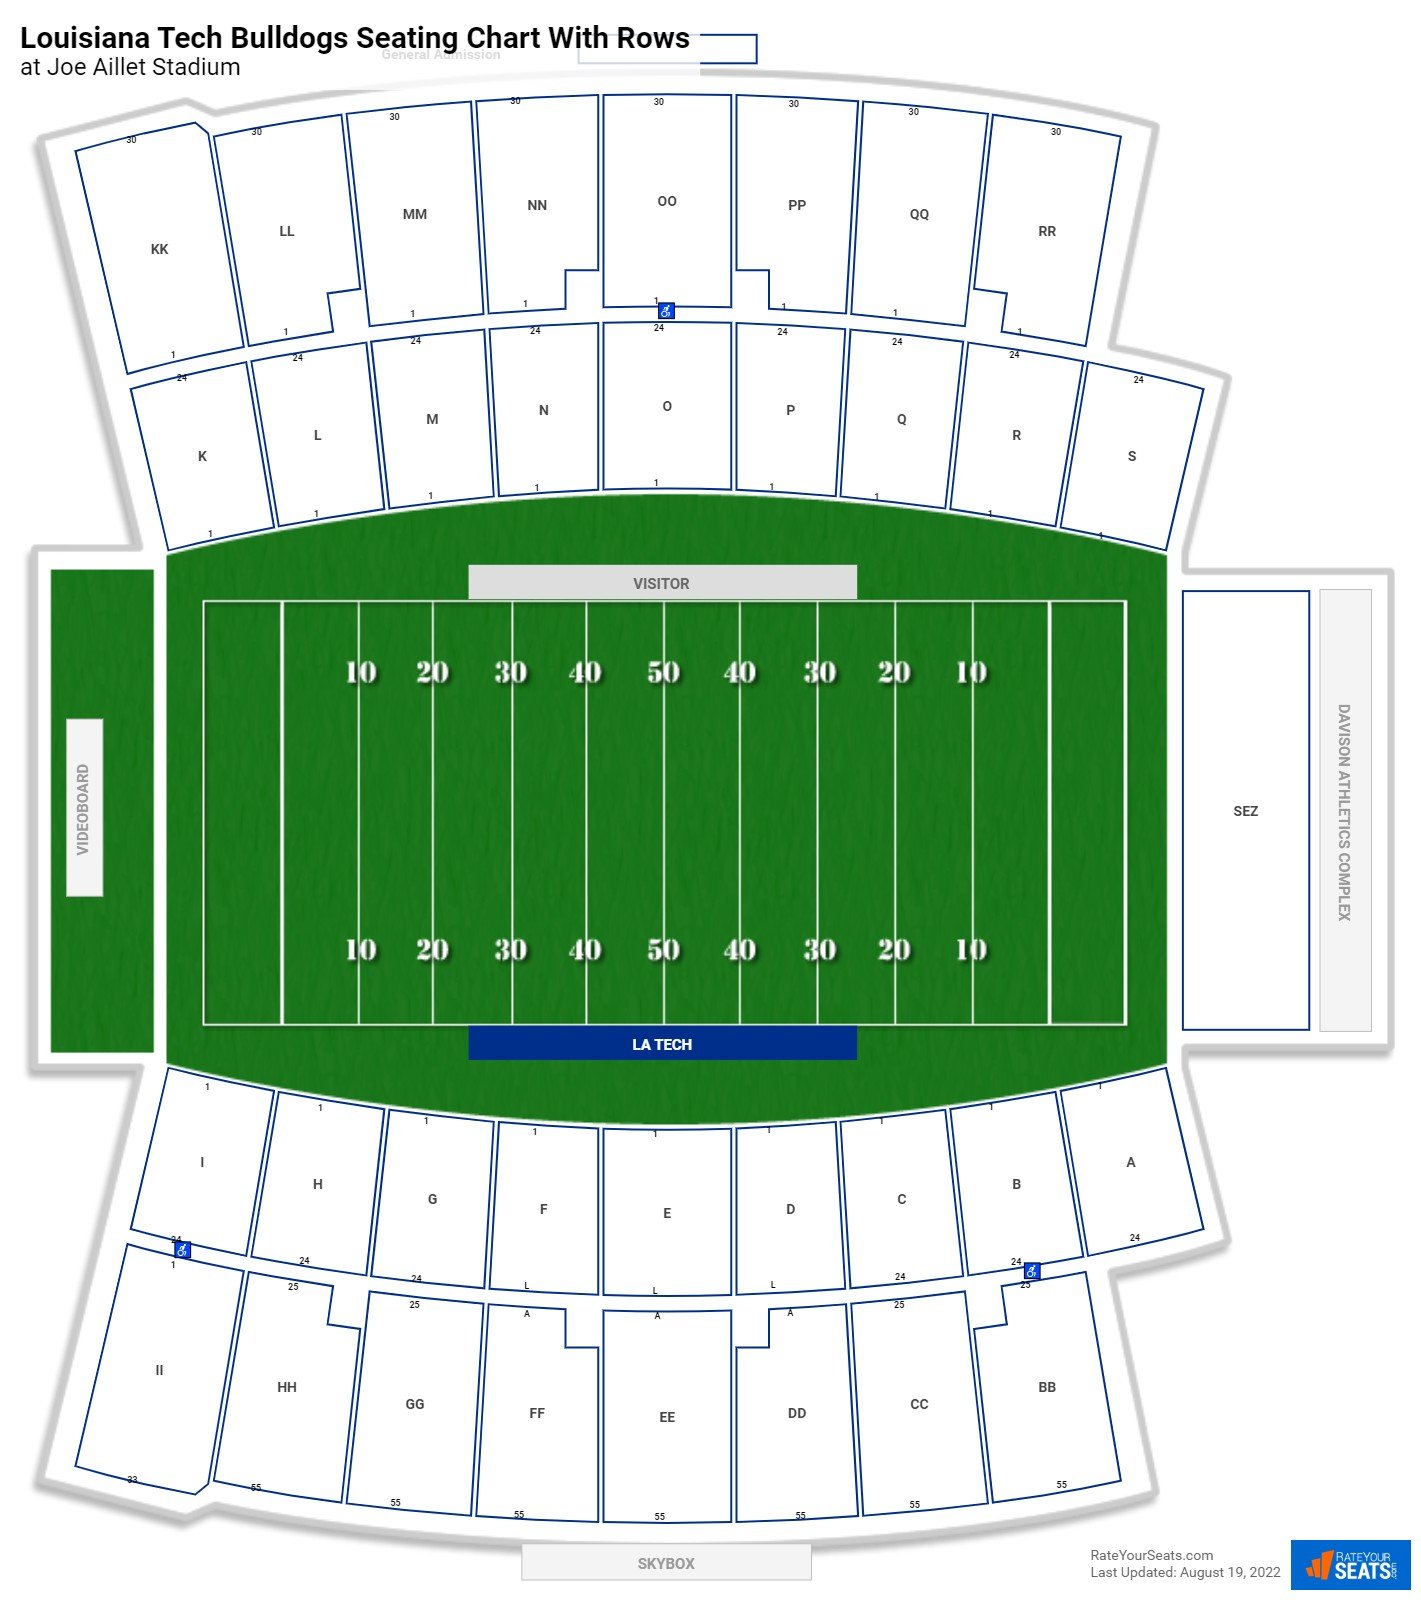 Joe Aillet Stadium seating chart with row numbers